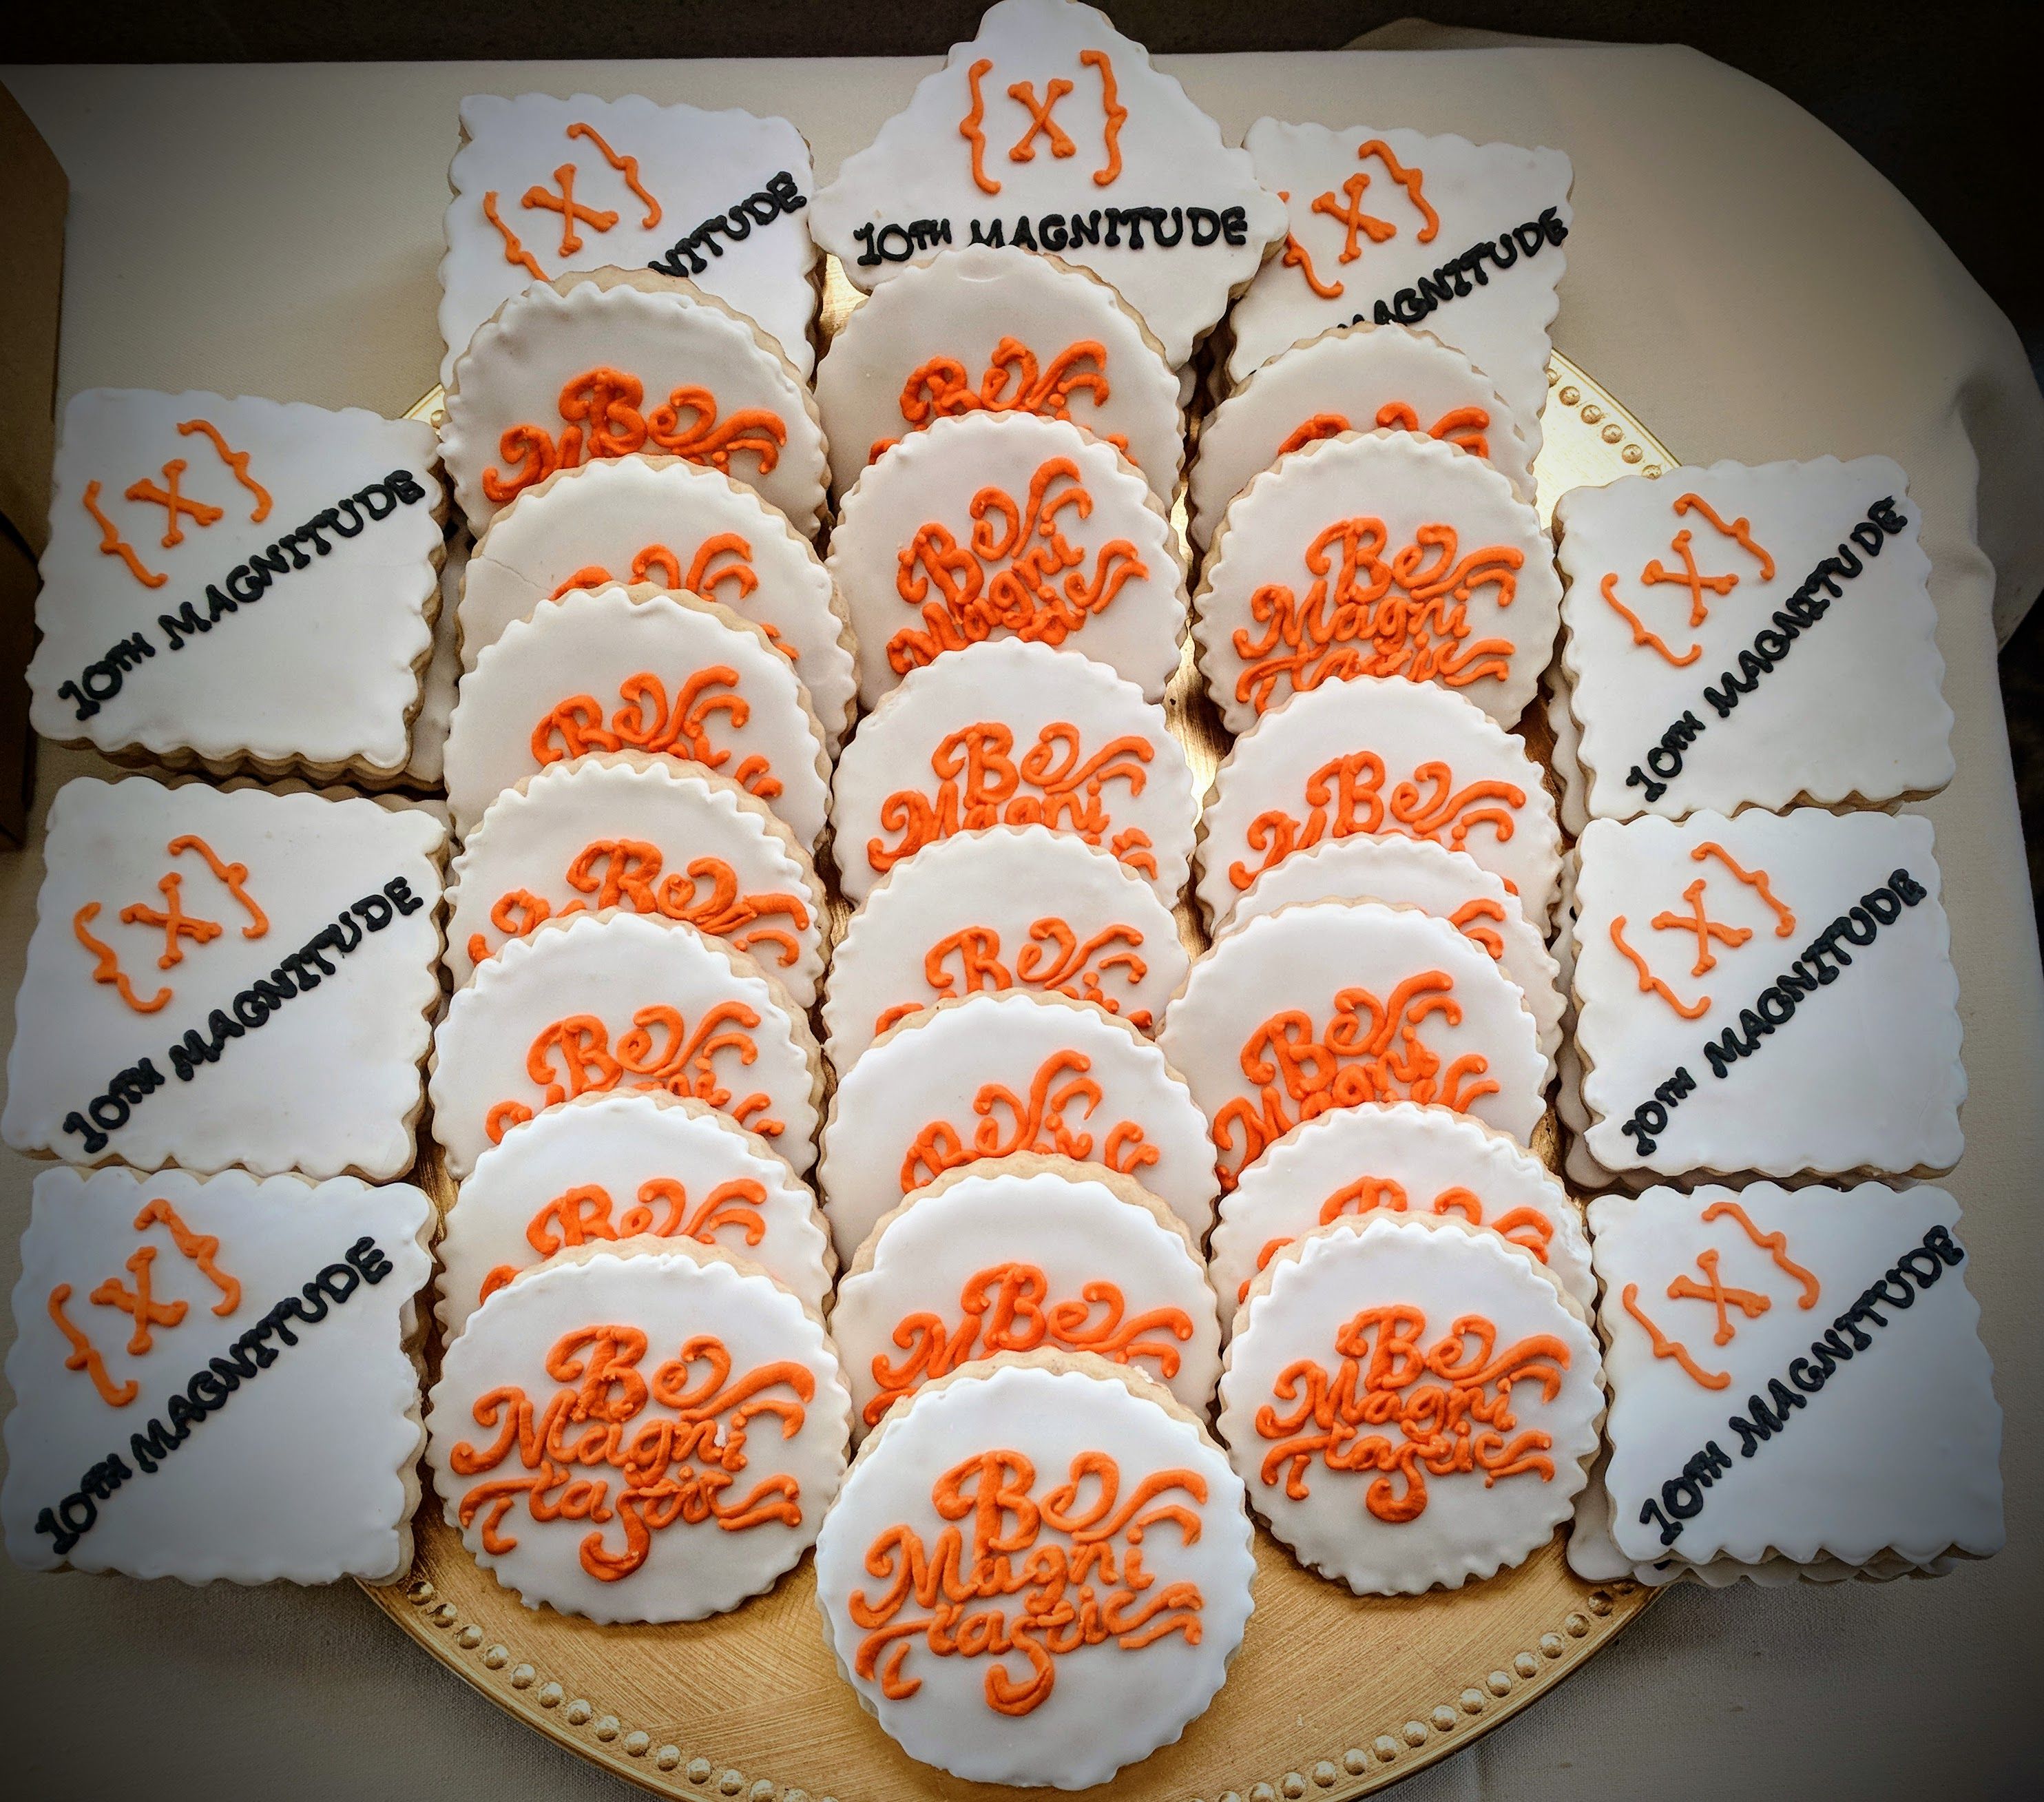 10th Magnitude Branded Cookies